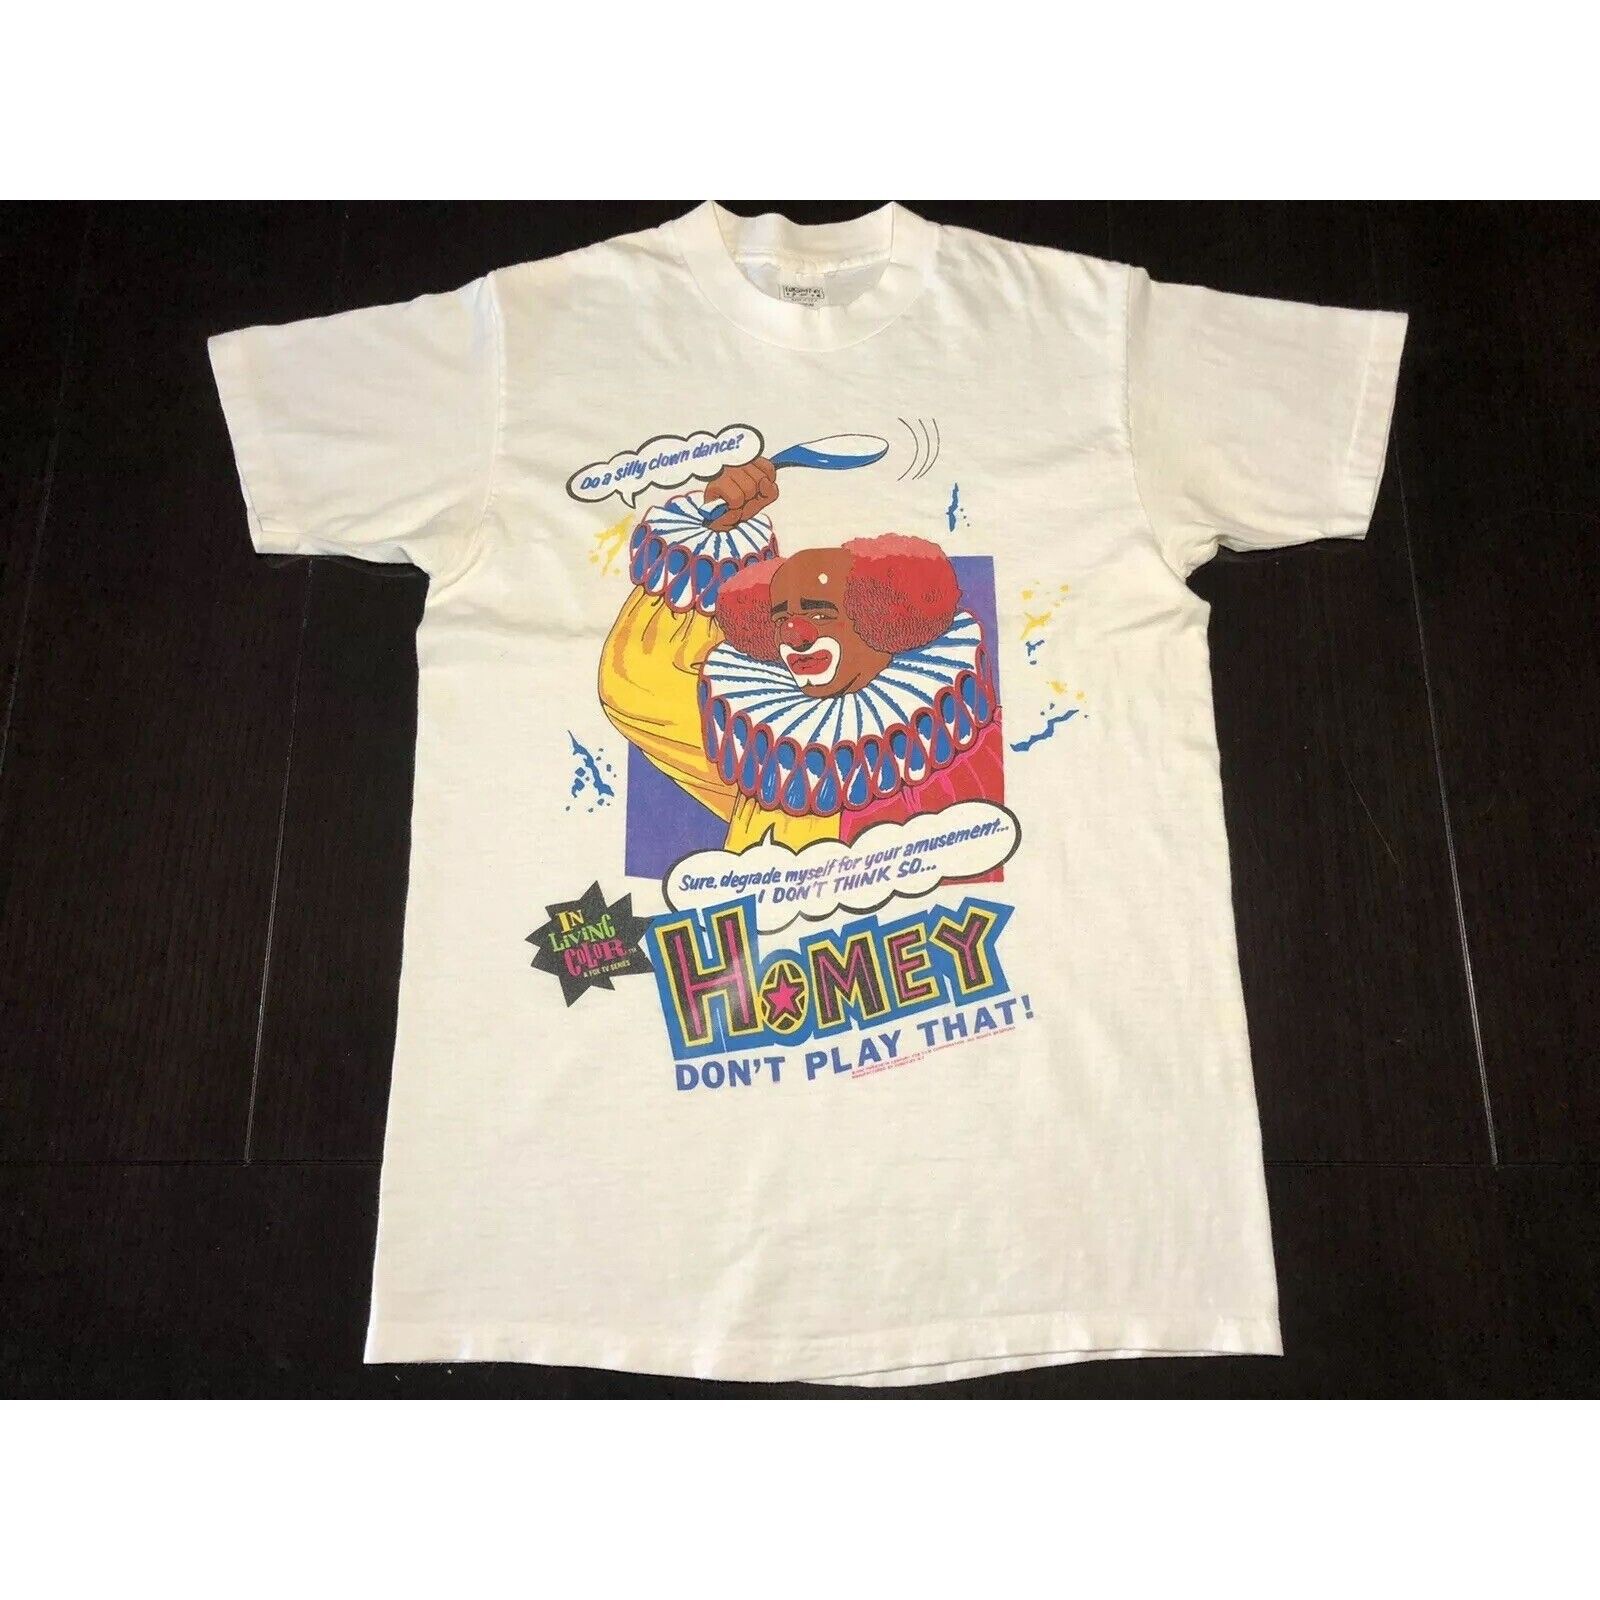 Vintage Rare Vintage In Living Color 1990 Homey the Clown T-Shirt Si Size US M / EU 48-50 / 2 - 1 Preview